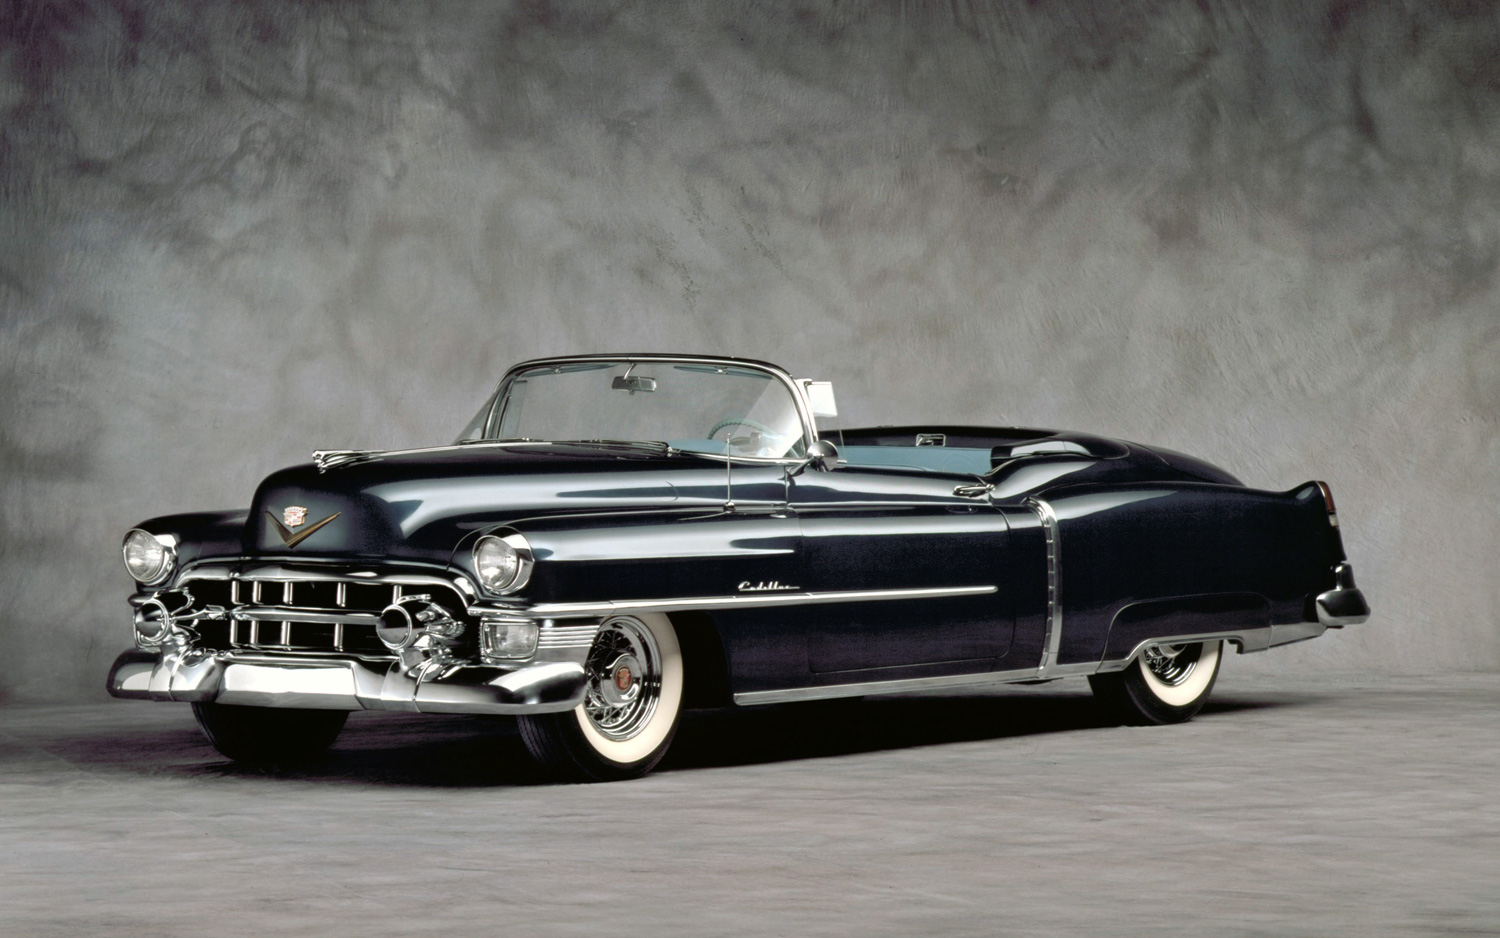 1949 Cadillac Sixty-two Convertible #2